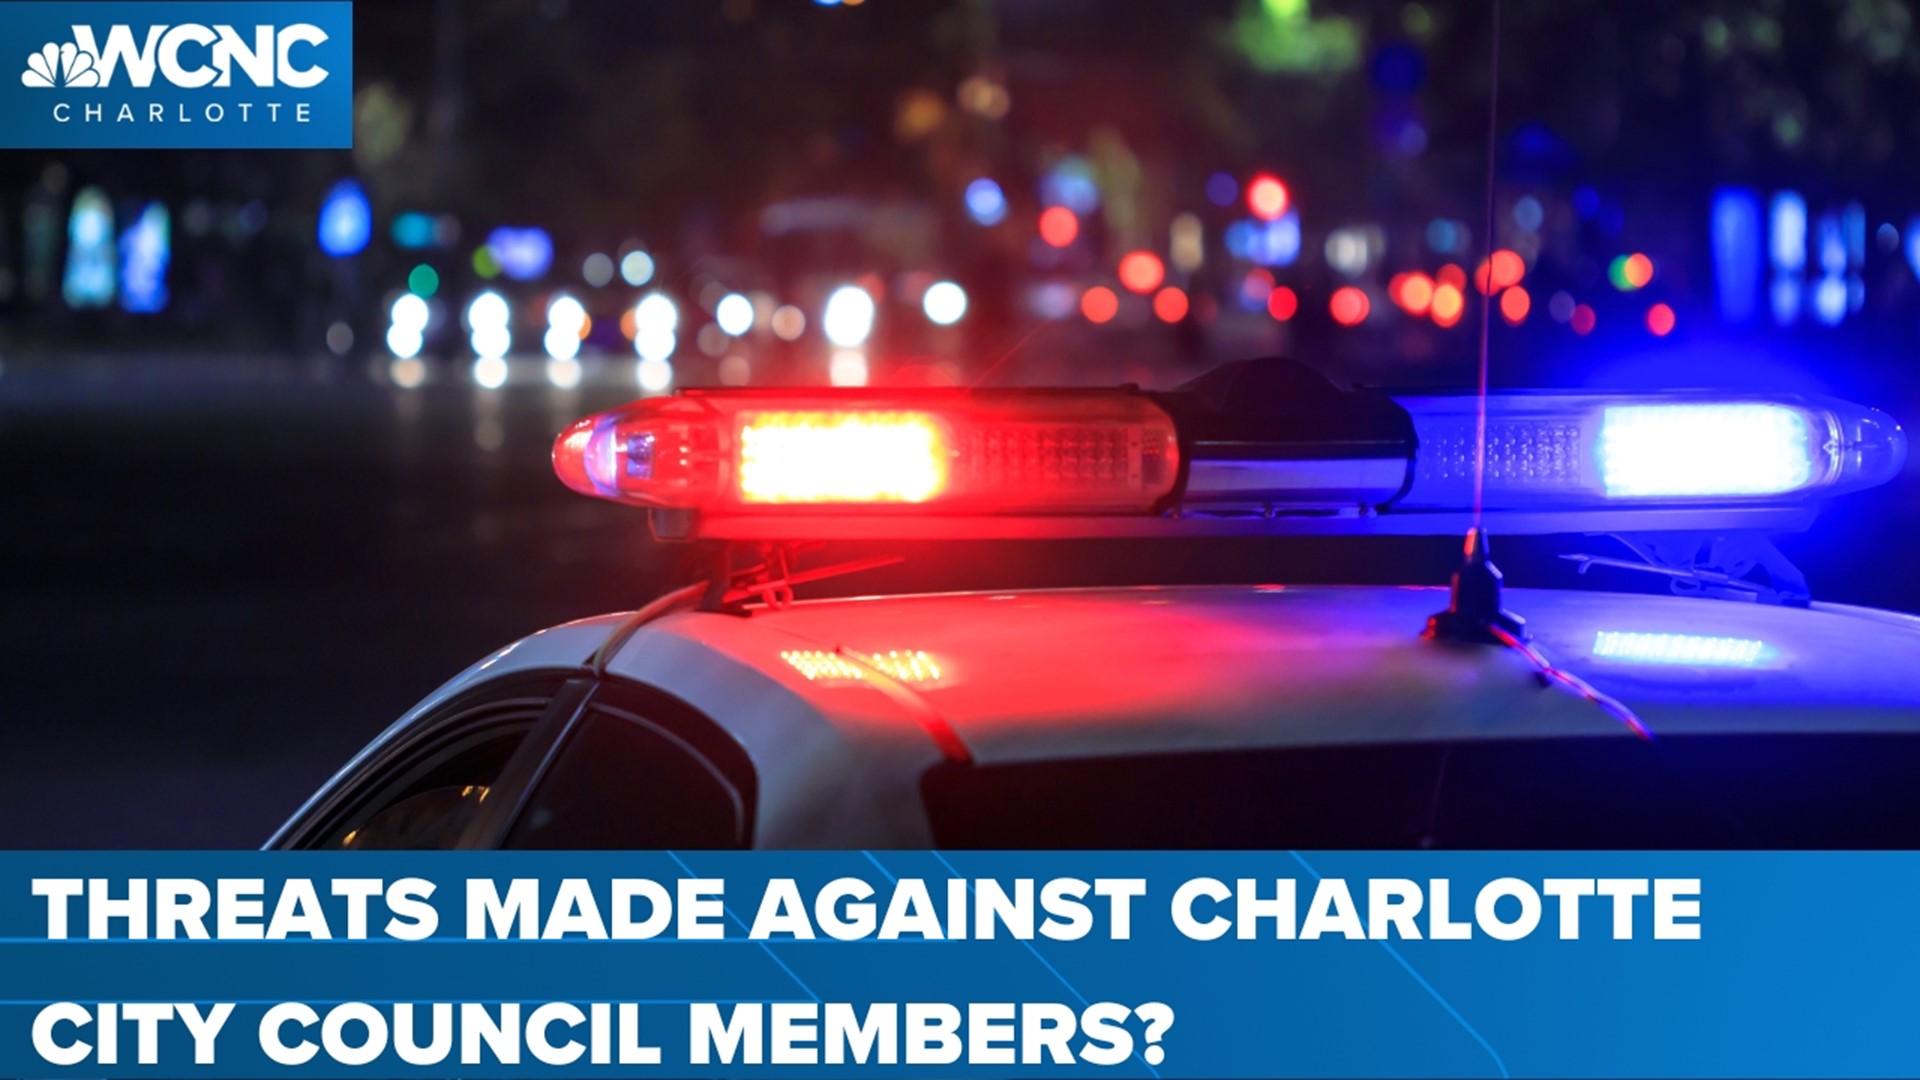 A Charlotte City Council member aired threats he says received by email. WCNC Charlotte is working to learn more.